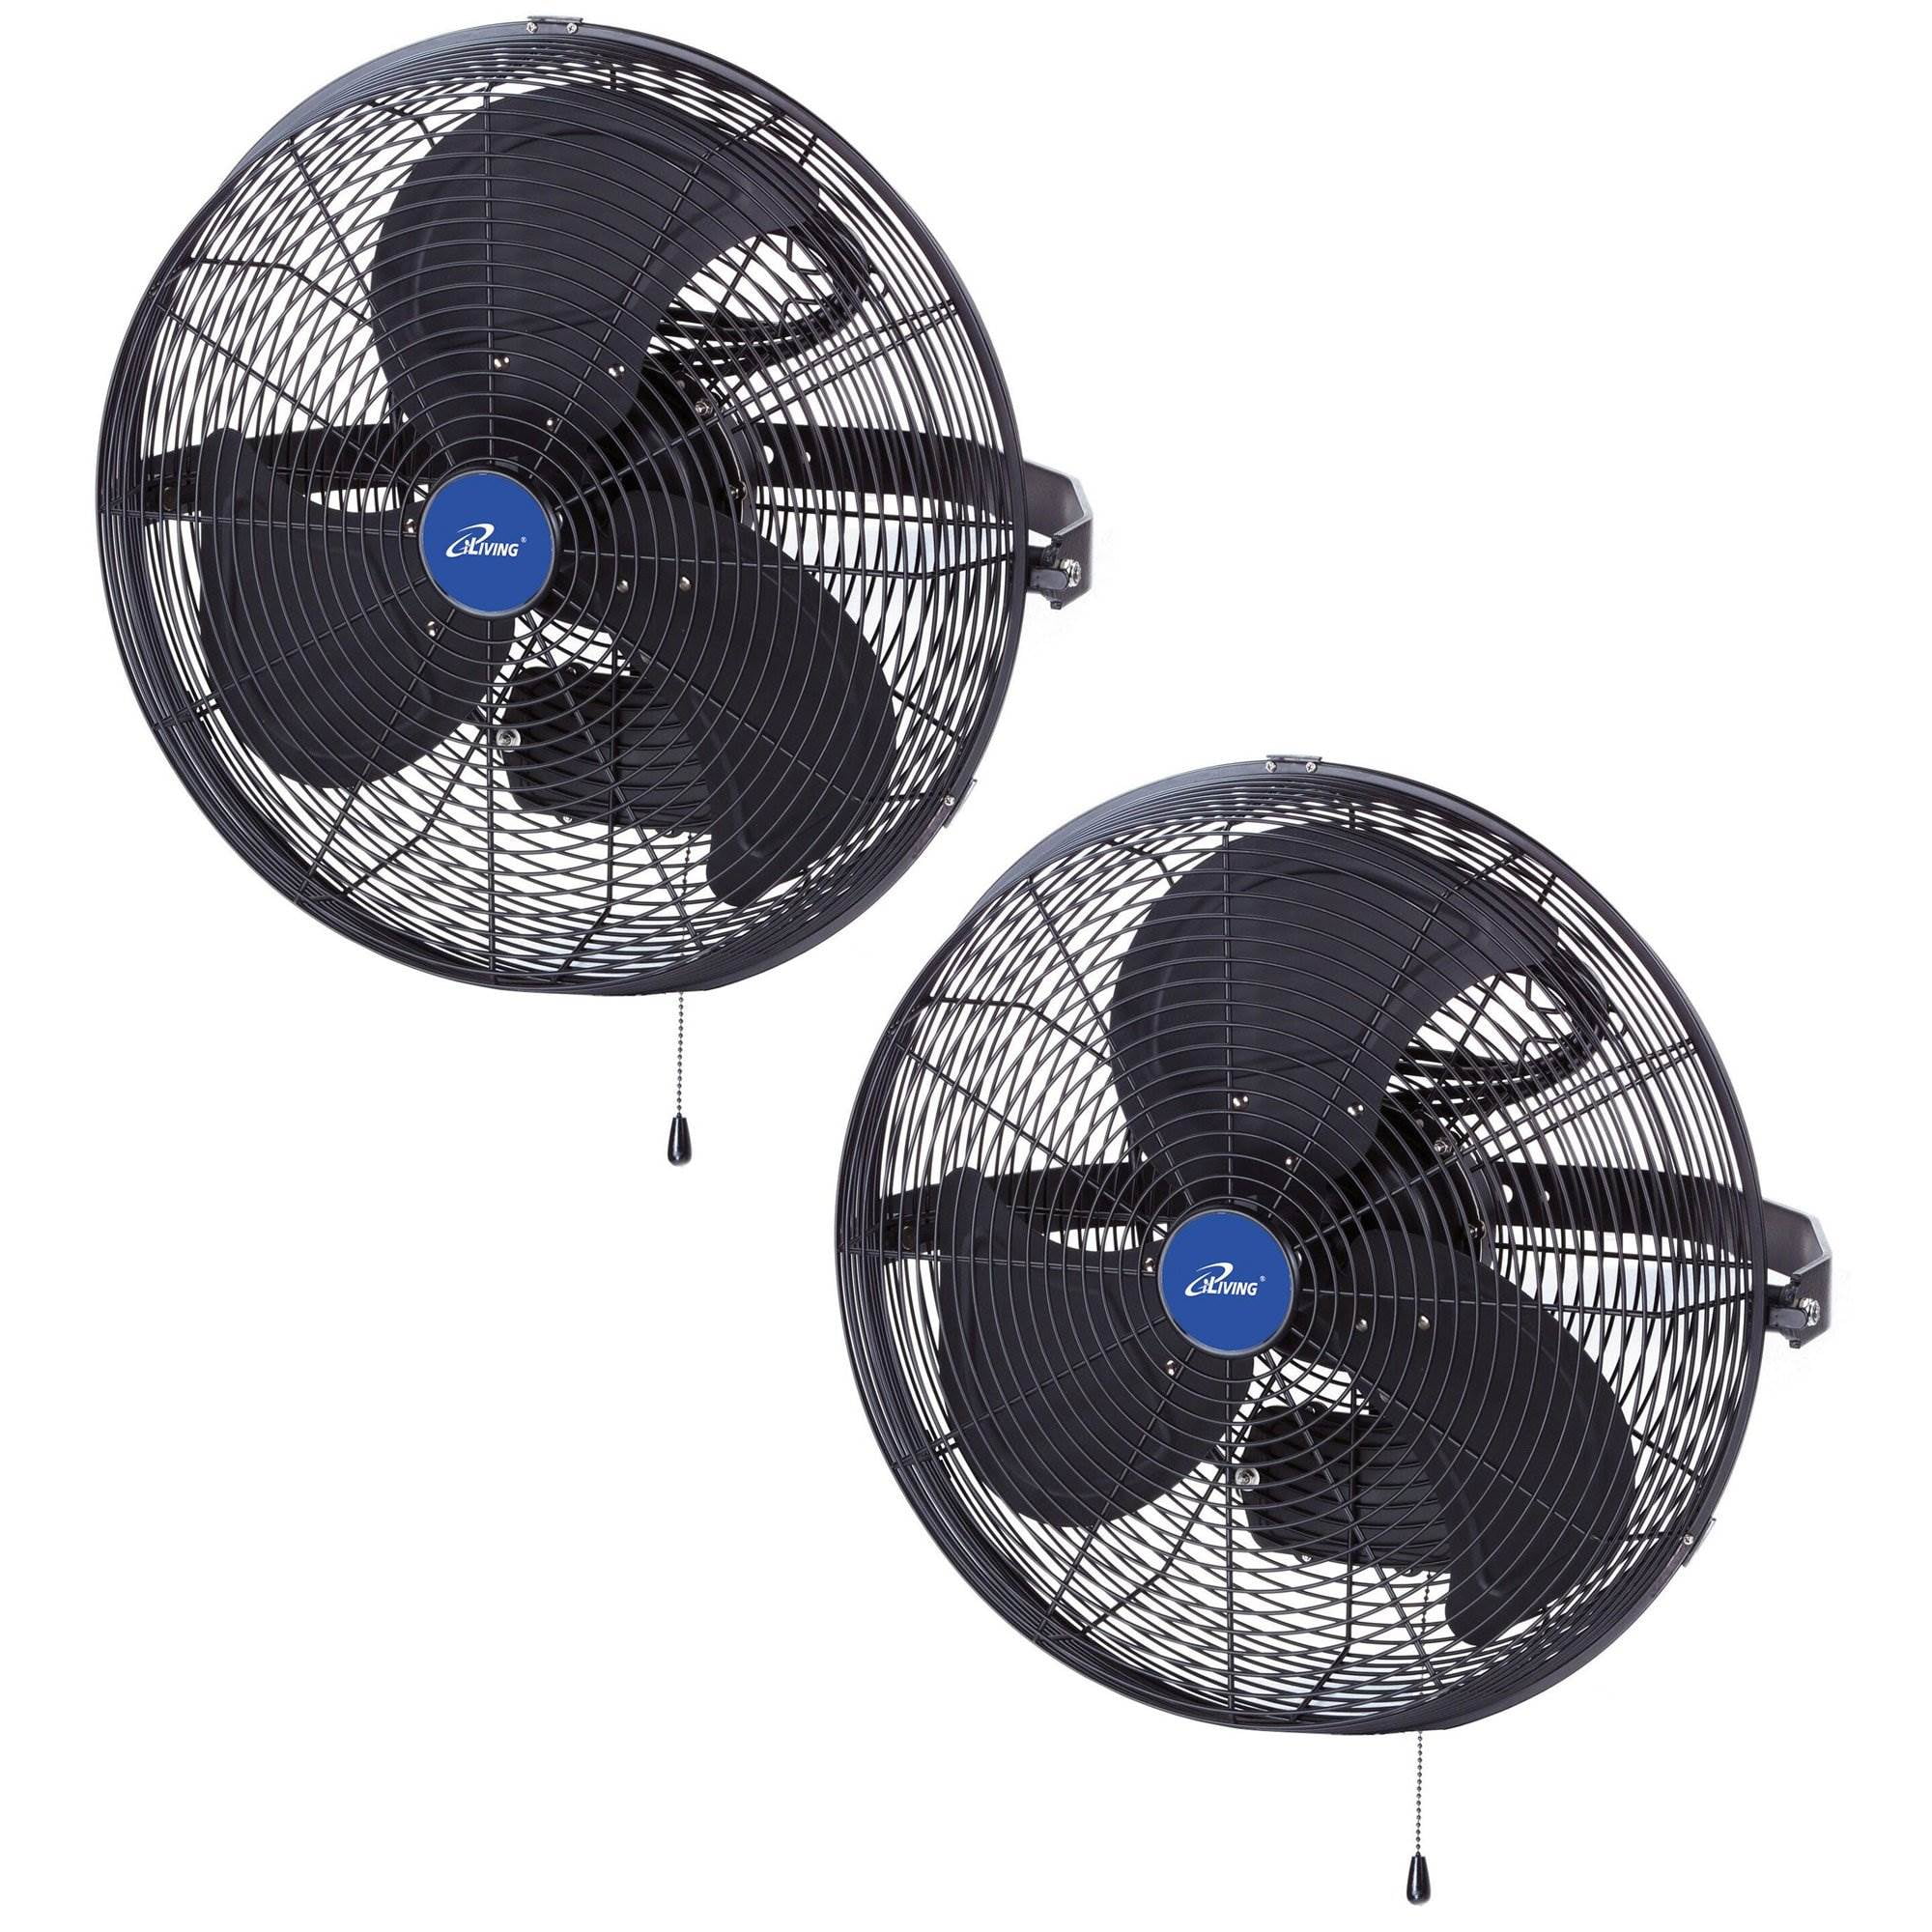 Iliving Ilg8e18 15 18 Wall Mounted, Outdoor Oscillating Fans For Patios Waterproof